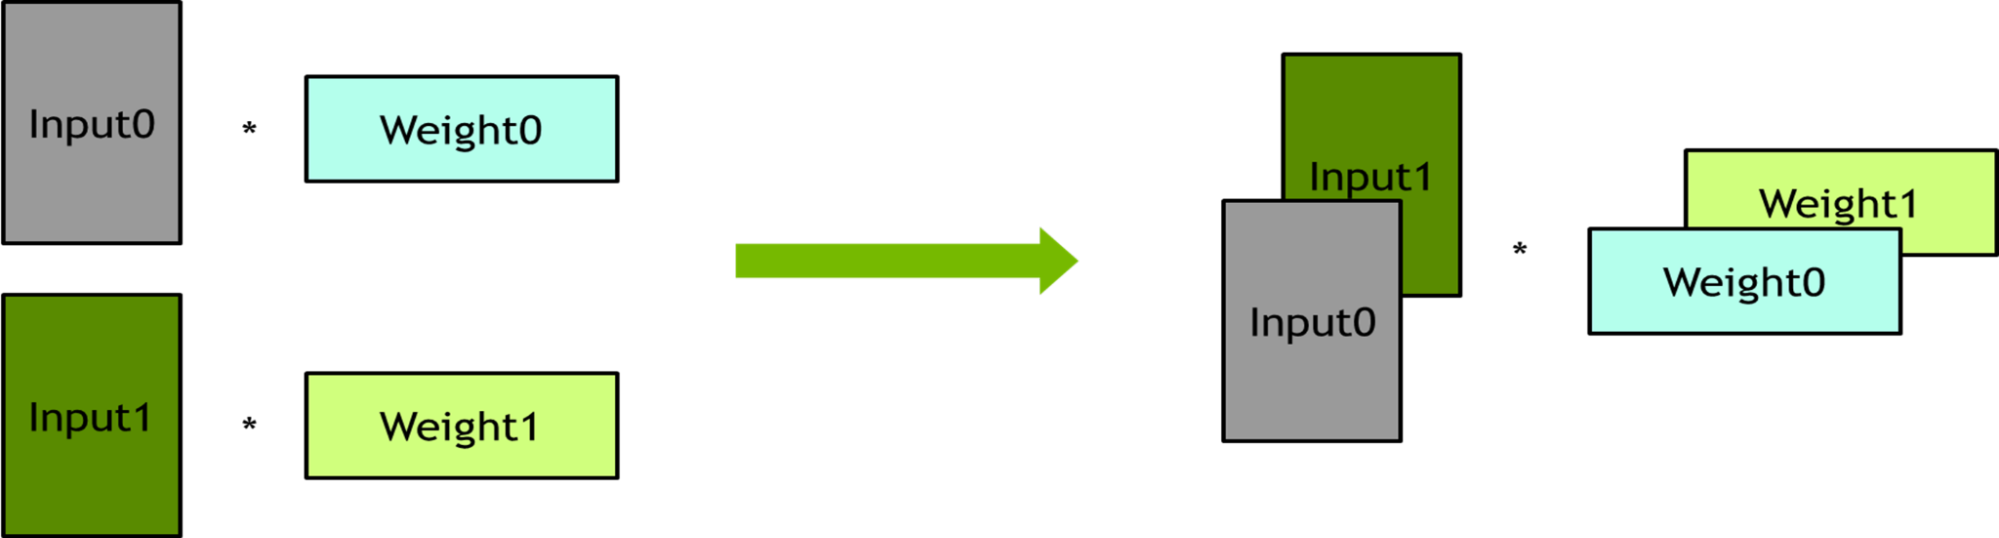 Diagram showing linear layers computed independently.
